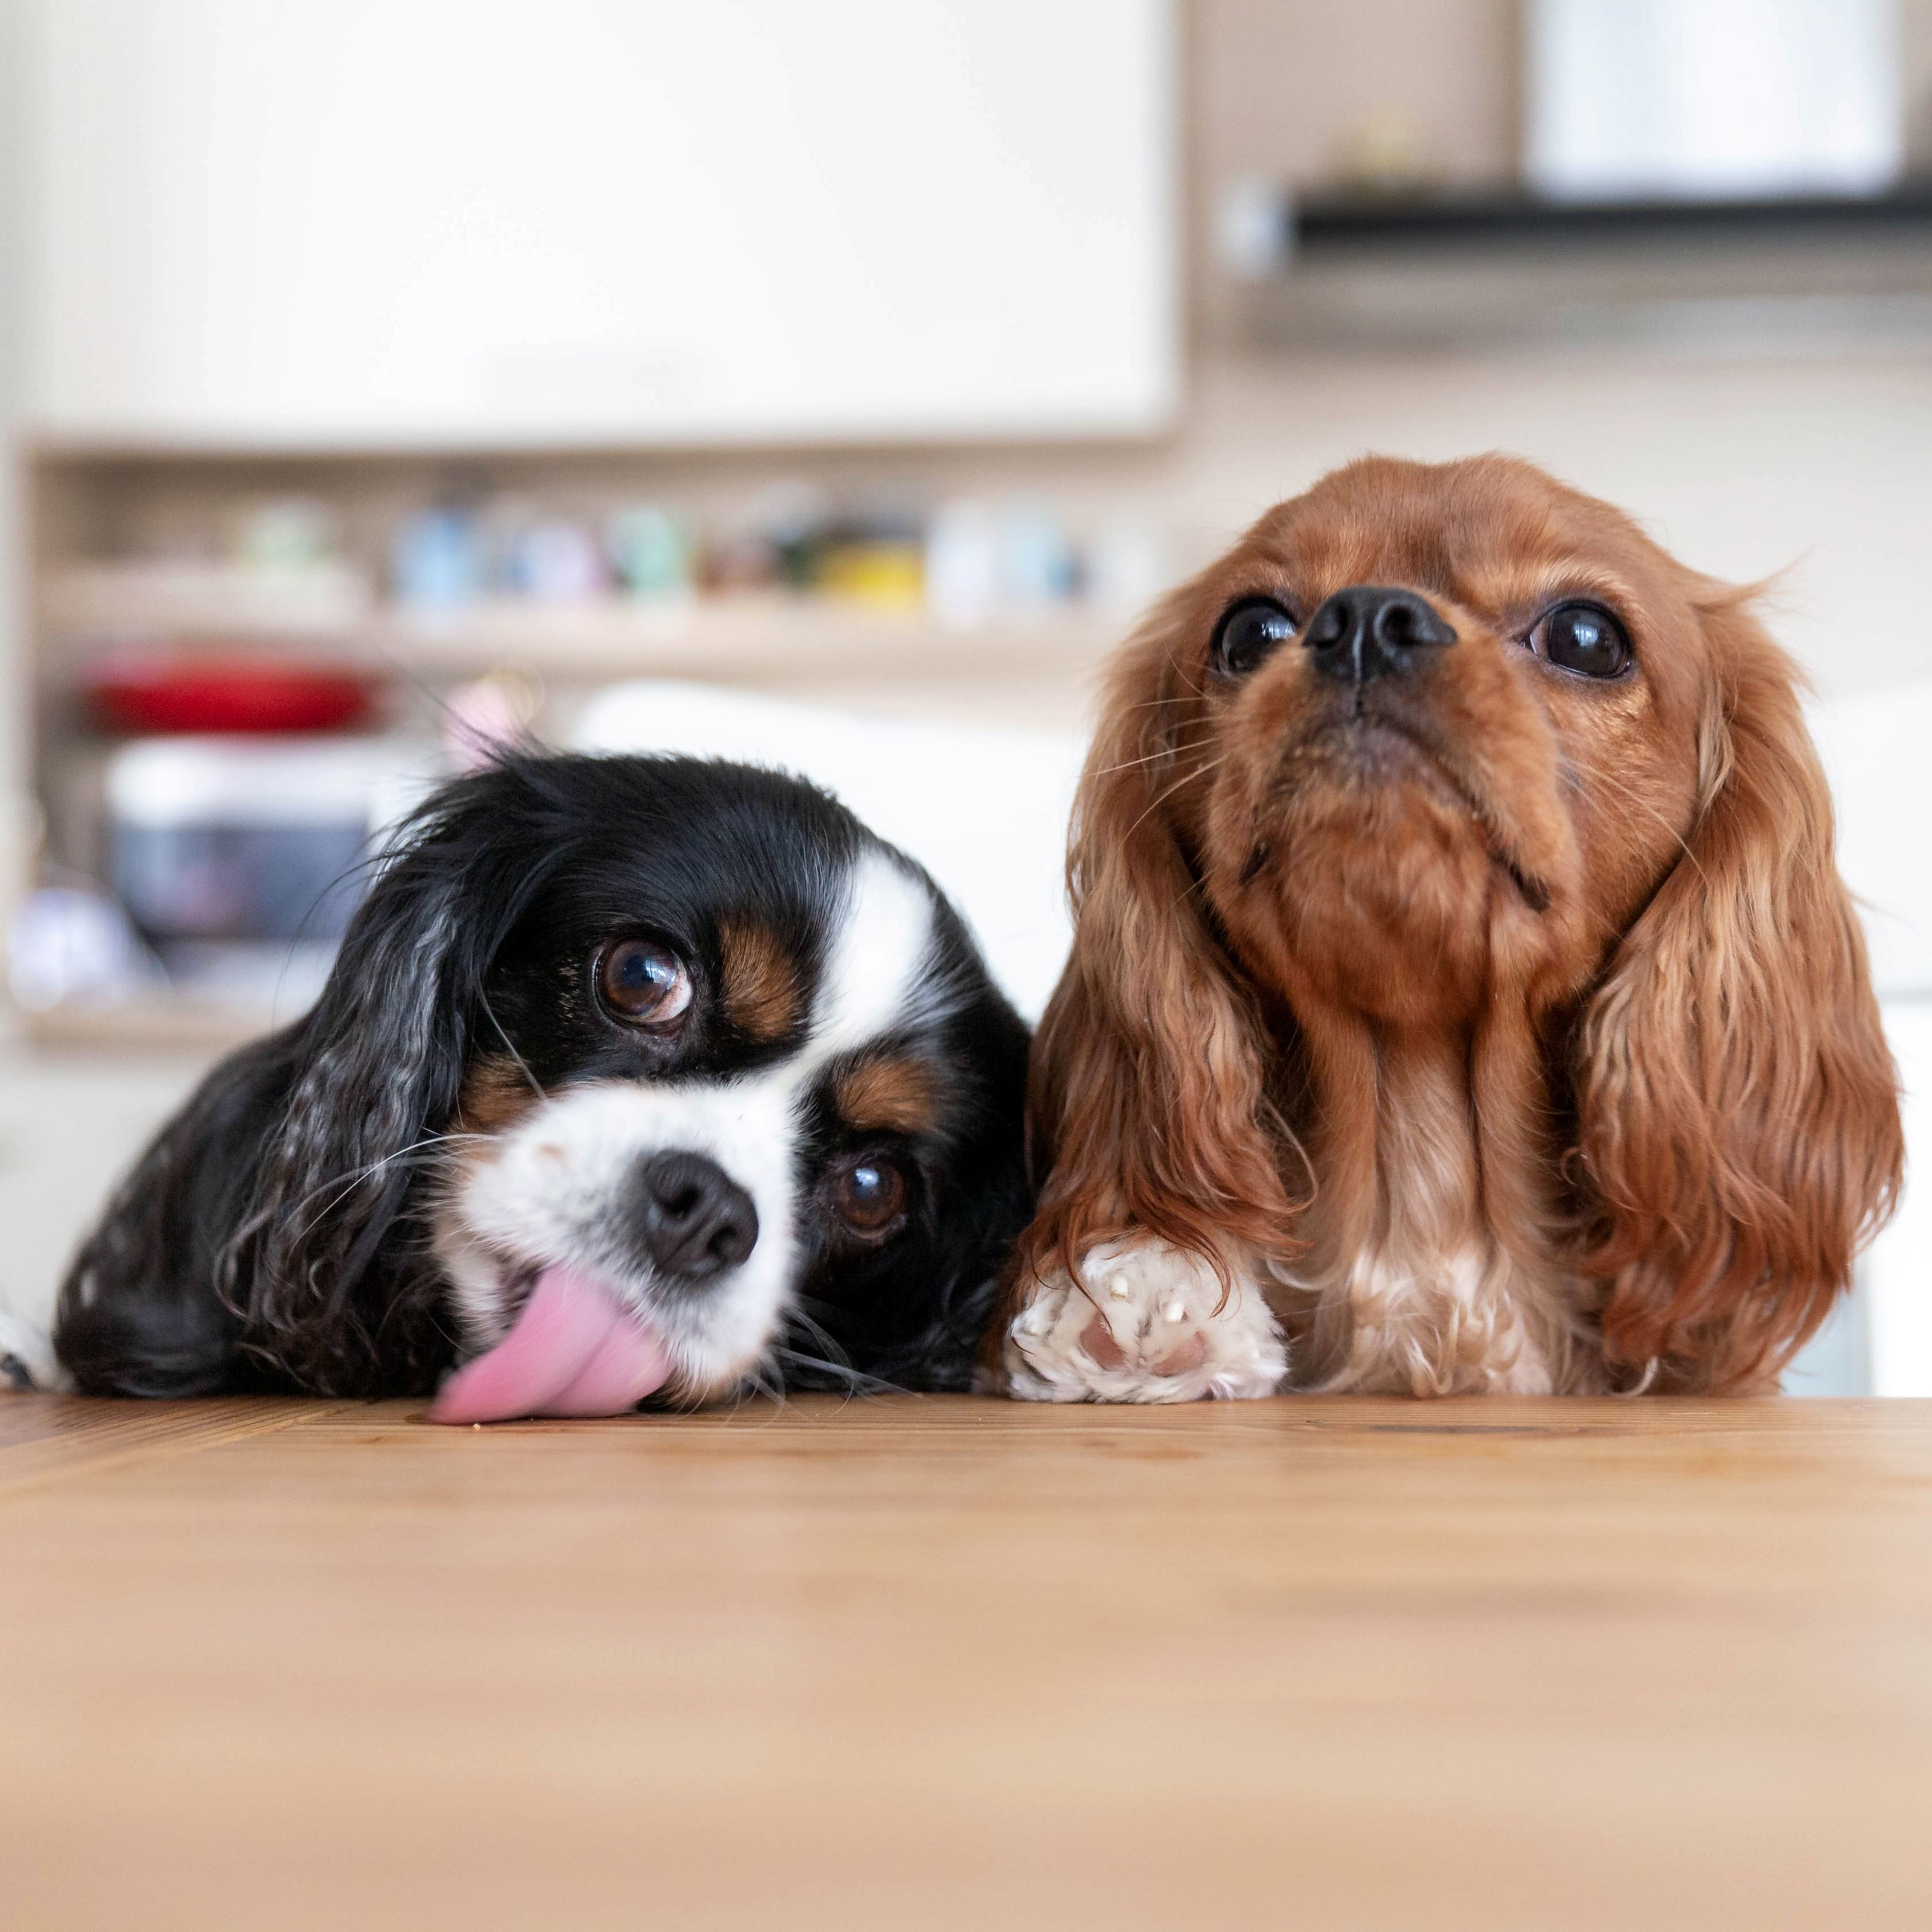 Two cocker spaniel puppies begging for food at the kitchen table.